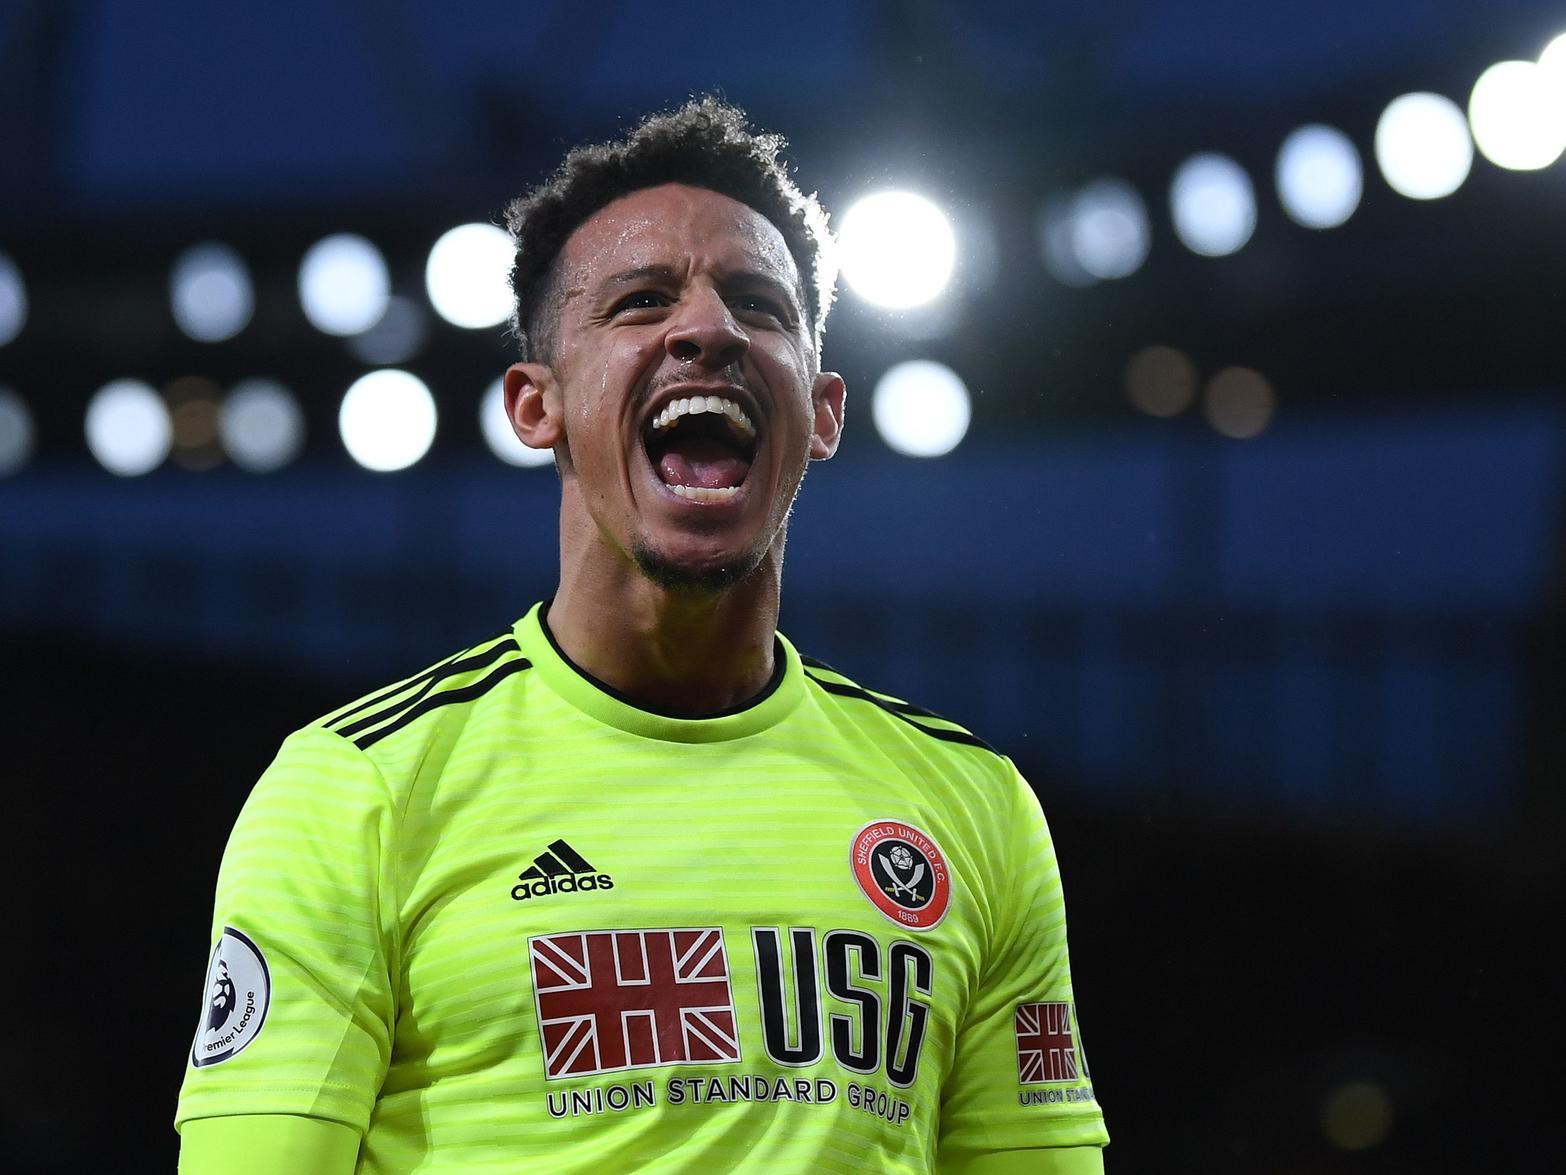 West Bromwich Albion are said to be closing in on a loan move for Sheffield United forward Callum Robinson, who has featured sparingly for the Blades since joining for 8m last summer. (Football Insider)